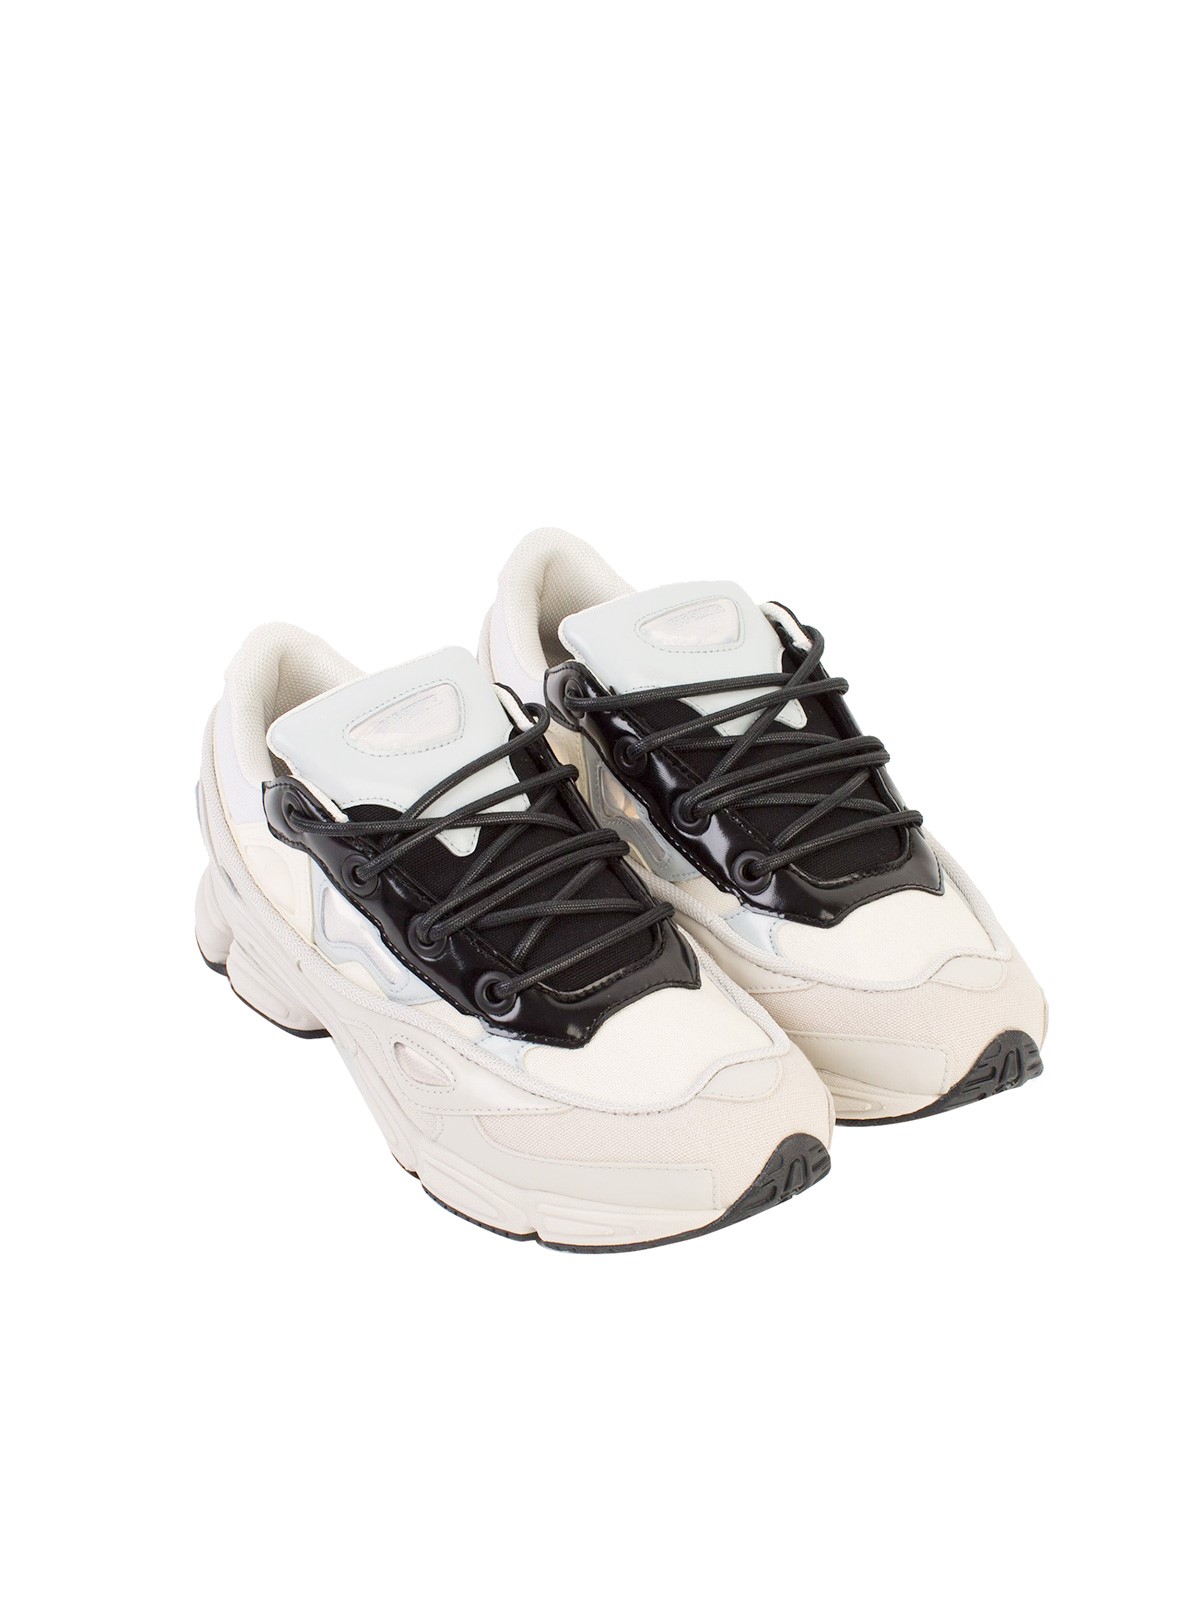 adidas by raf simons OZWEEGO III SNEAKERS available on montiboutique ...